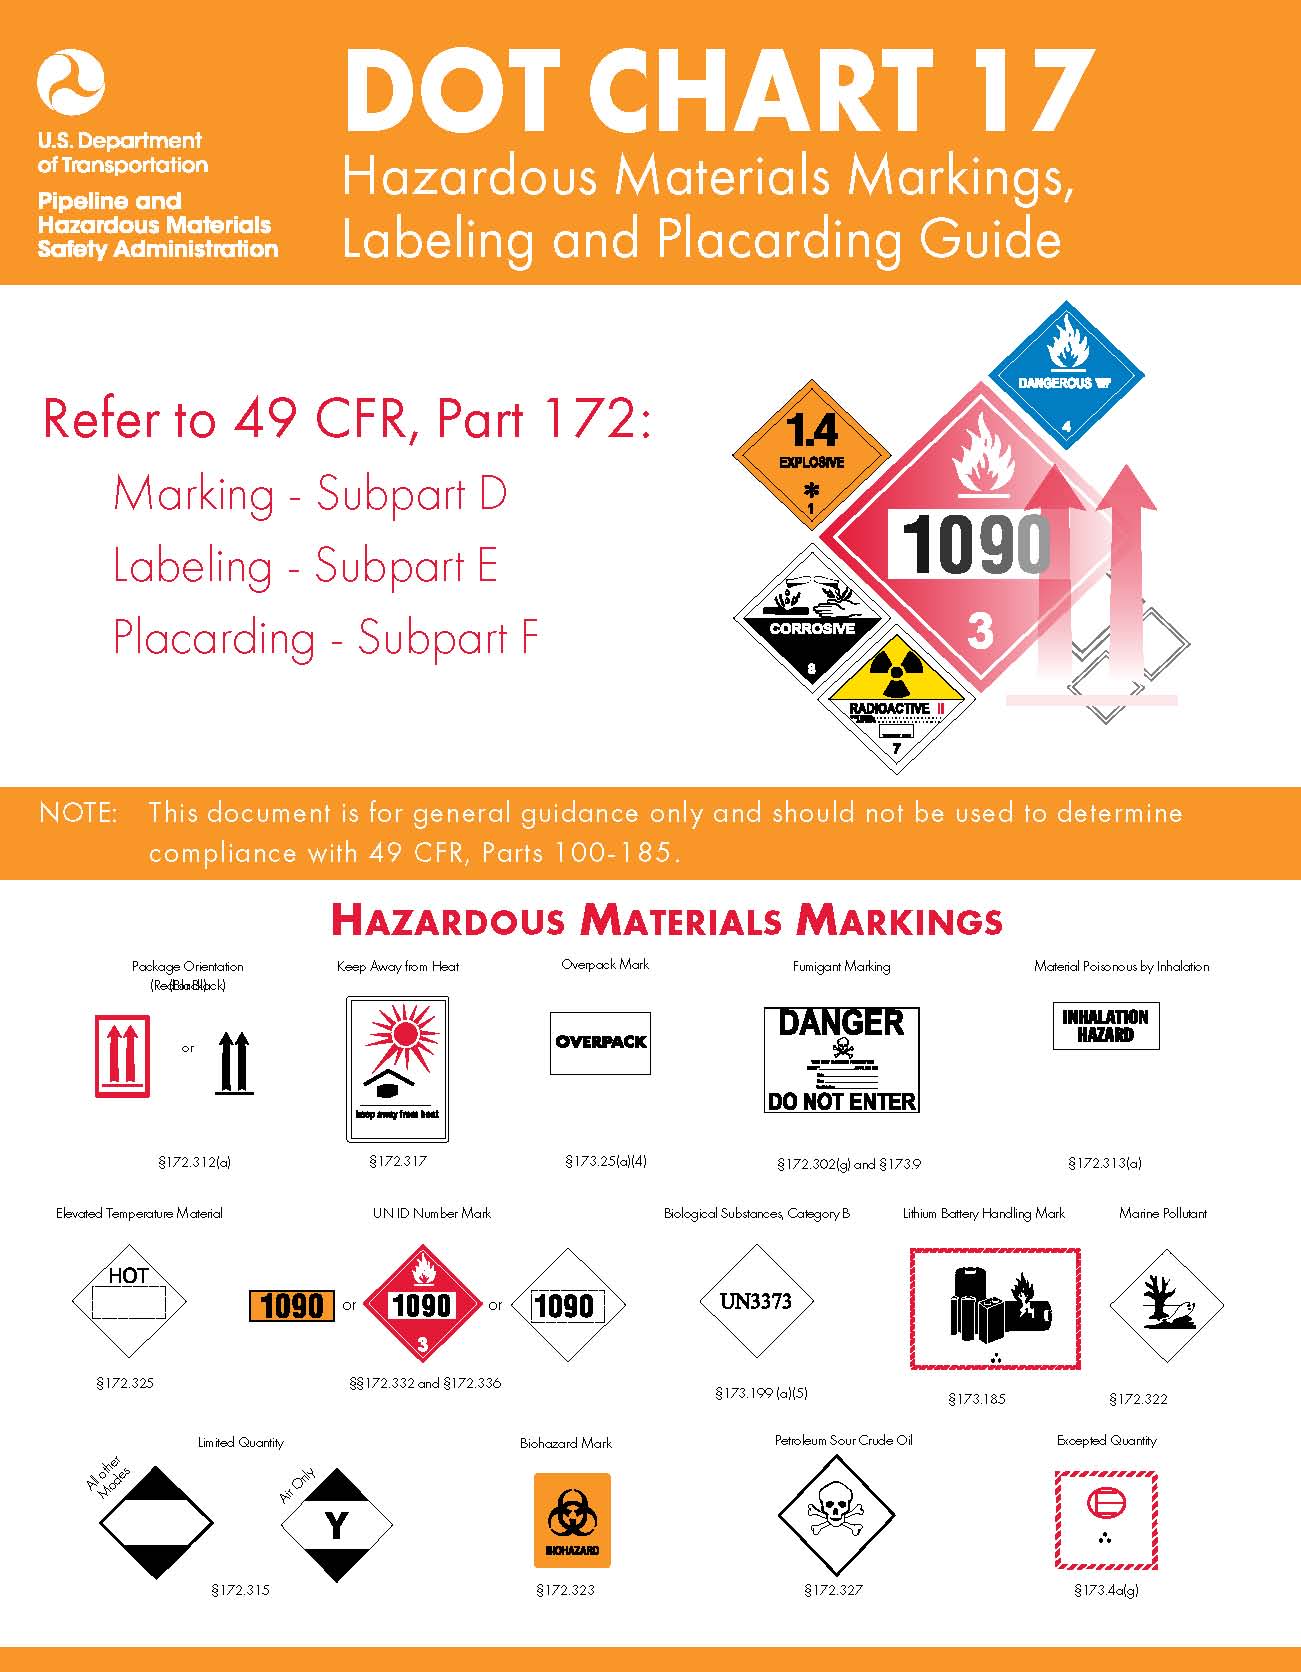 D.O.T. Chart 17 - Hazardous Materials Markings  Labeling and Placarding Guide